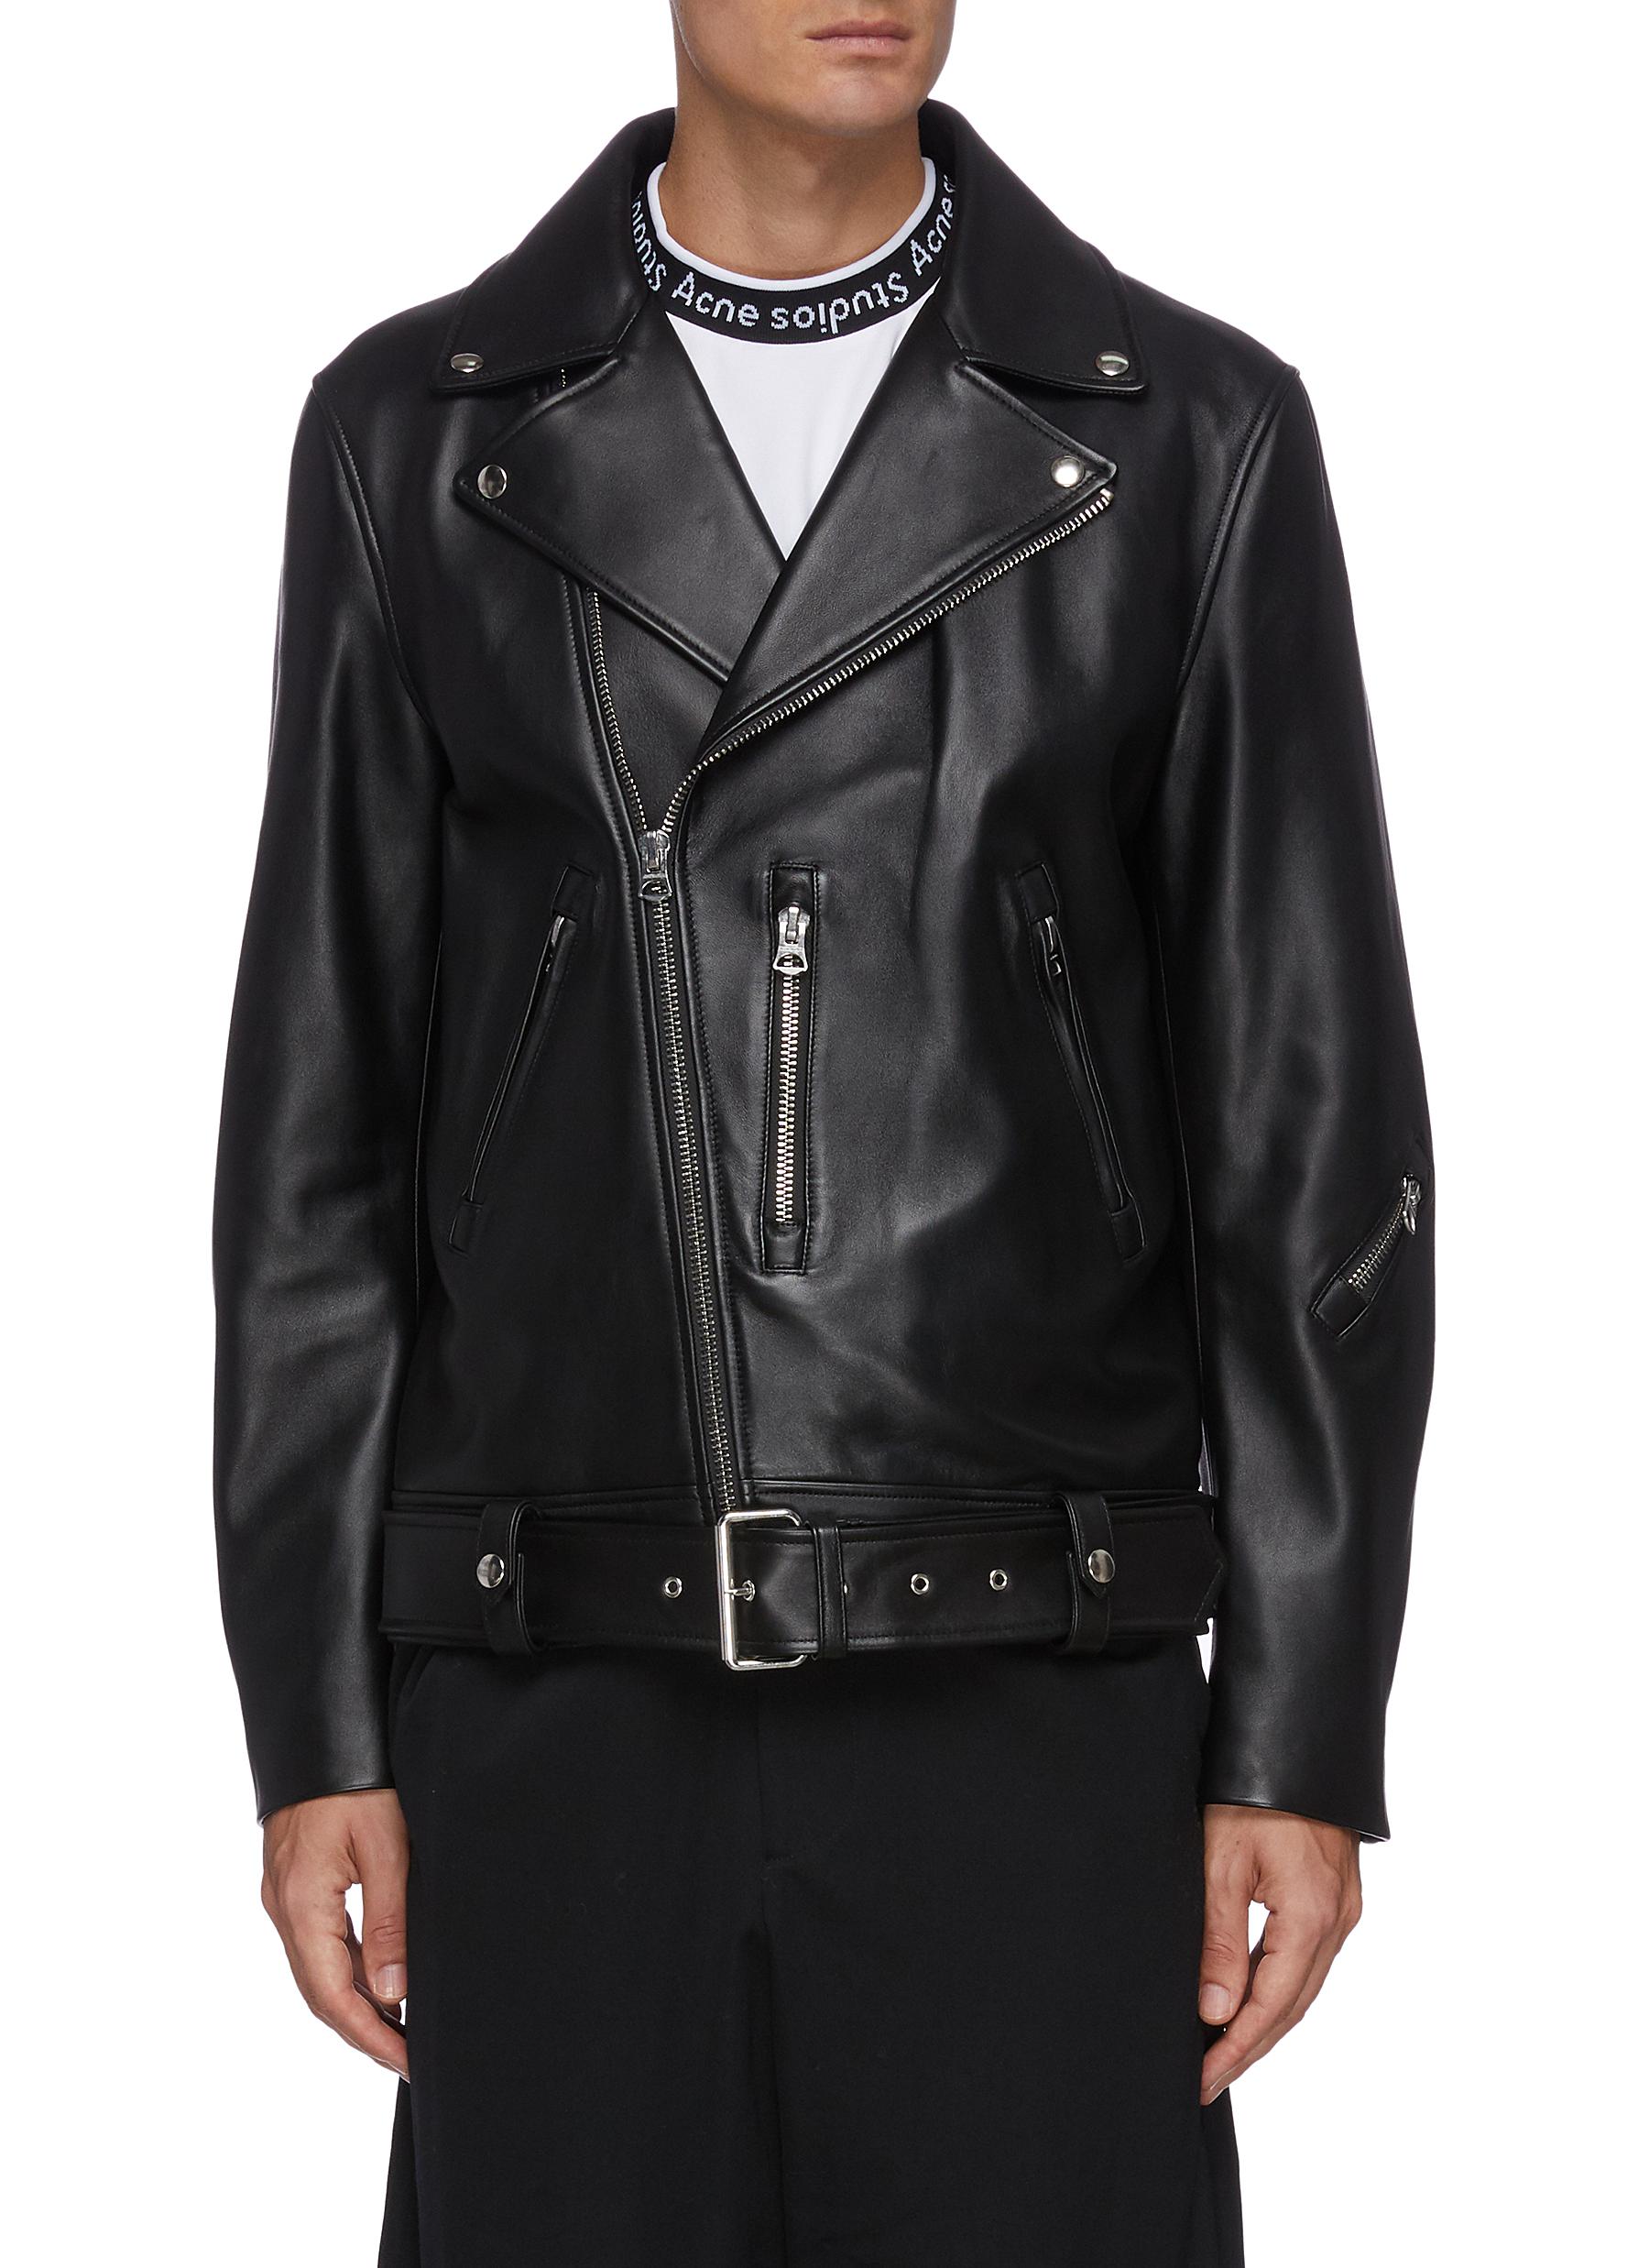 Acne Leather Jacket Mens